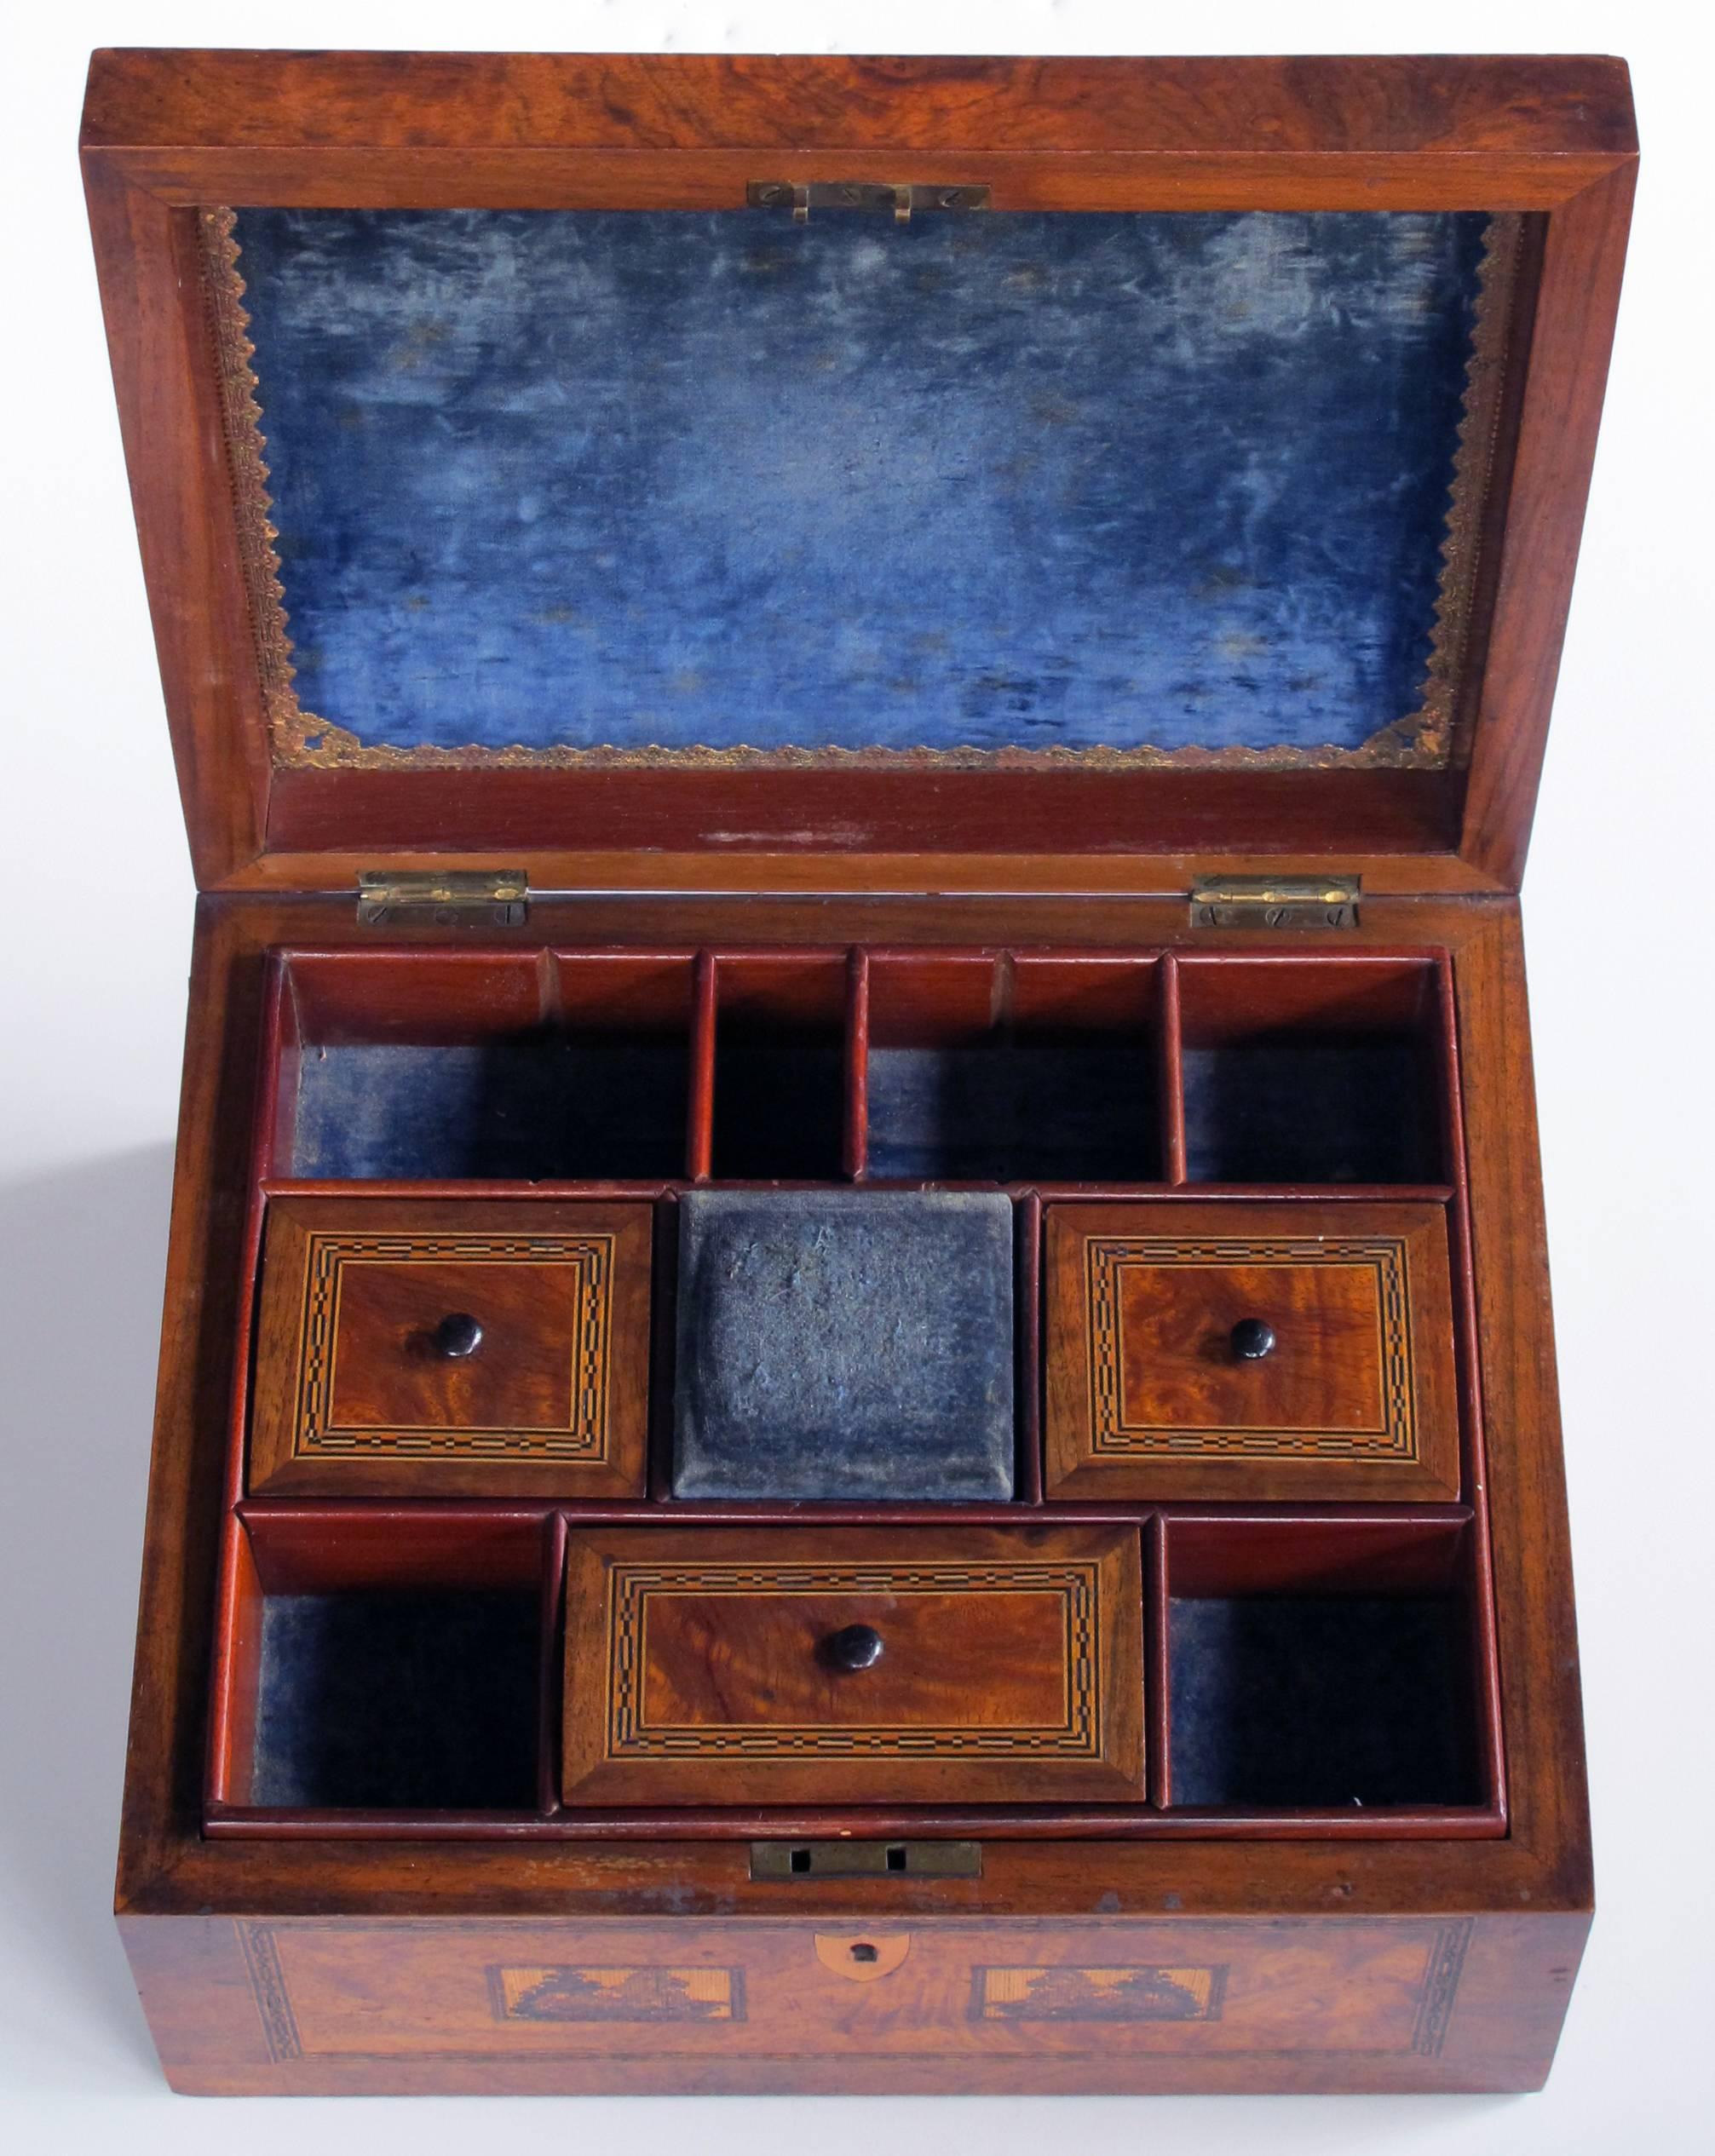 A well-crafted English Tonbridge Ware inlaid burl wood dressing box depicting 'Bodiam Castle'; signed and dated on underside of cushion compartment 'Made by Thomas Barrett 1811-1883'; the richly-patinated box opening to reveal a compartmentalized